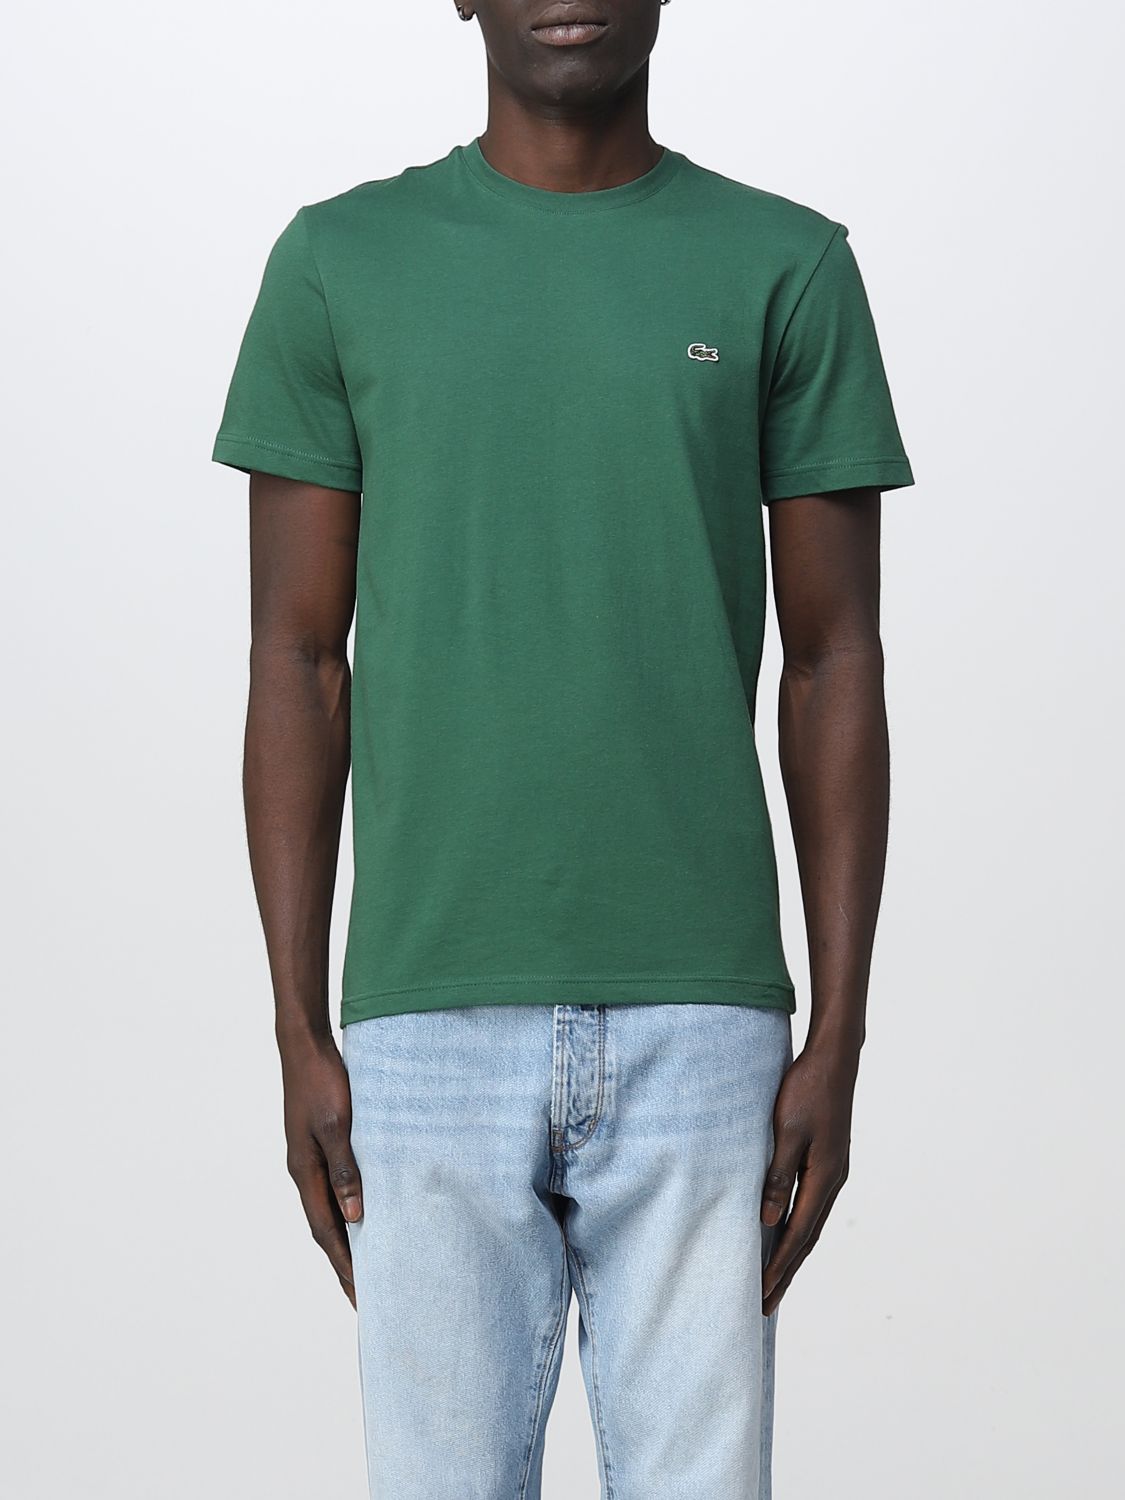 Mathis Kilde Indtil t-shirt for man - Green | Lacoste t-shirt TH2038 online at GIGLIO.COM